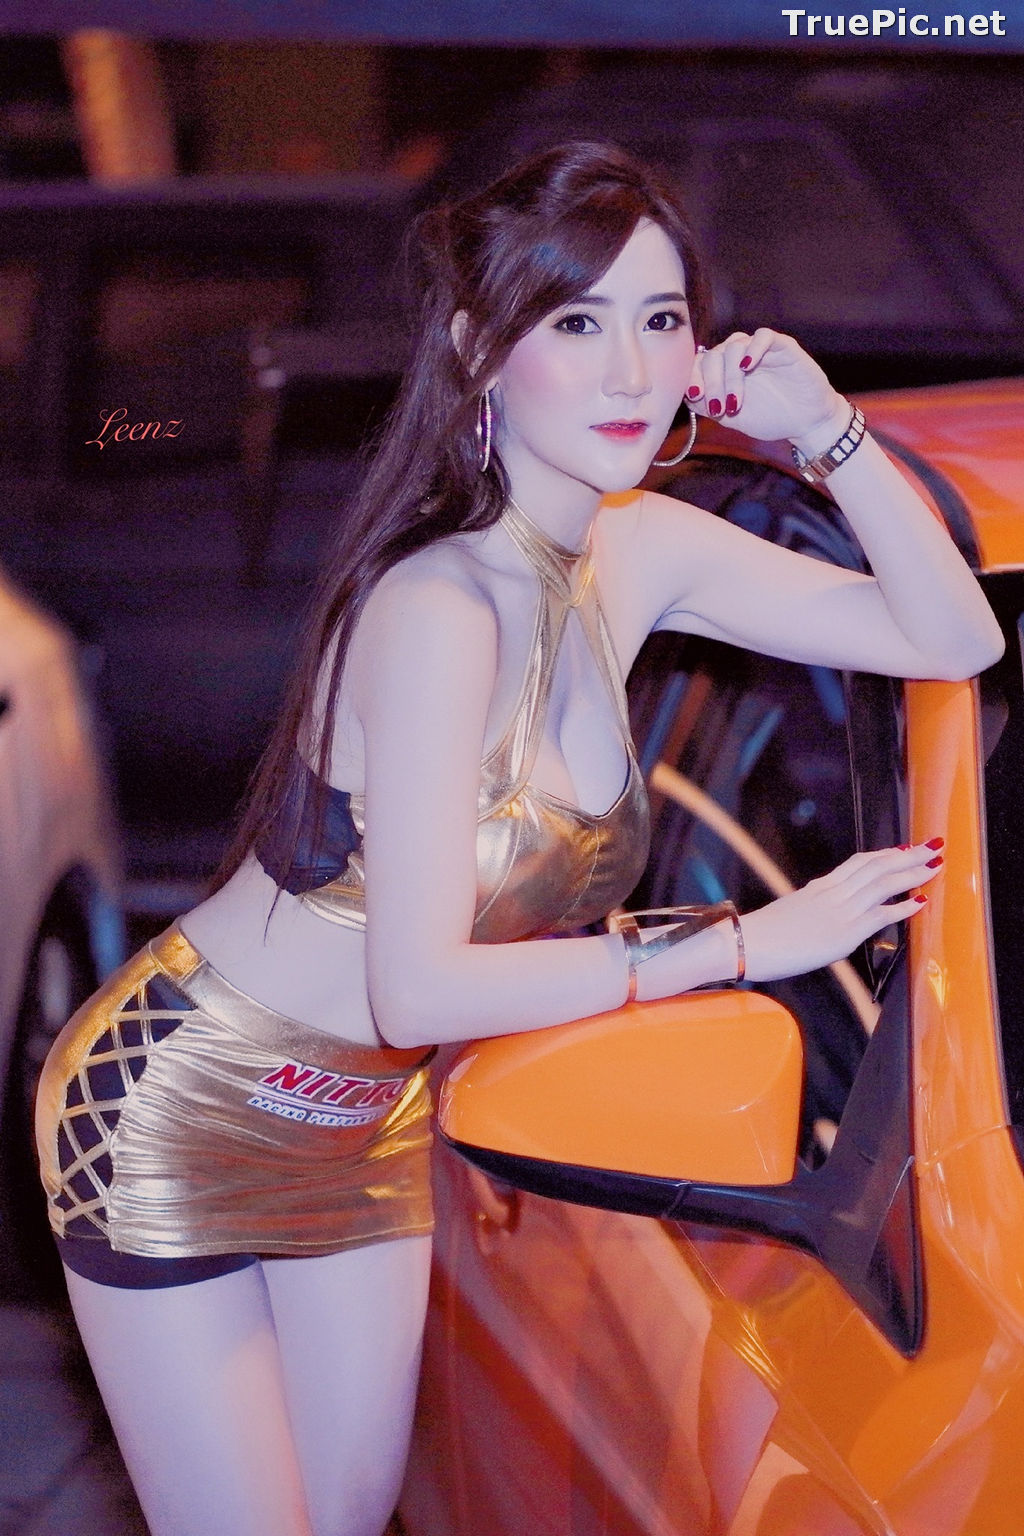 Image Thailand Racing Model - Thailand Showgirl Model Collection #3 - TruePic.net - Picture-48